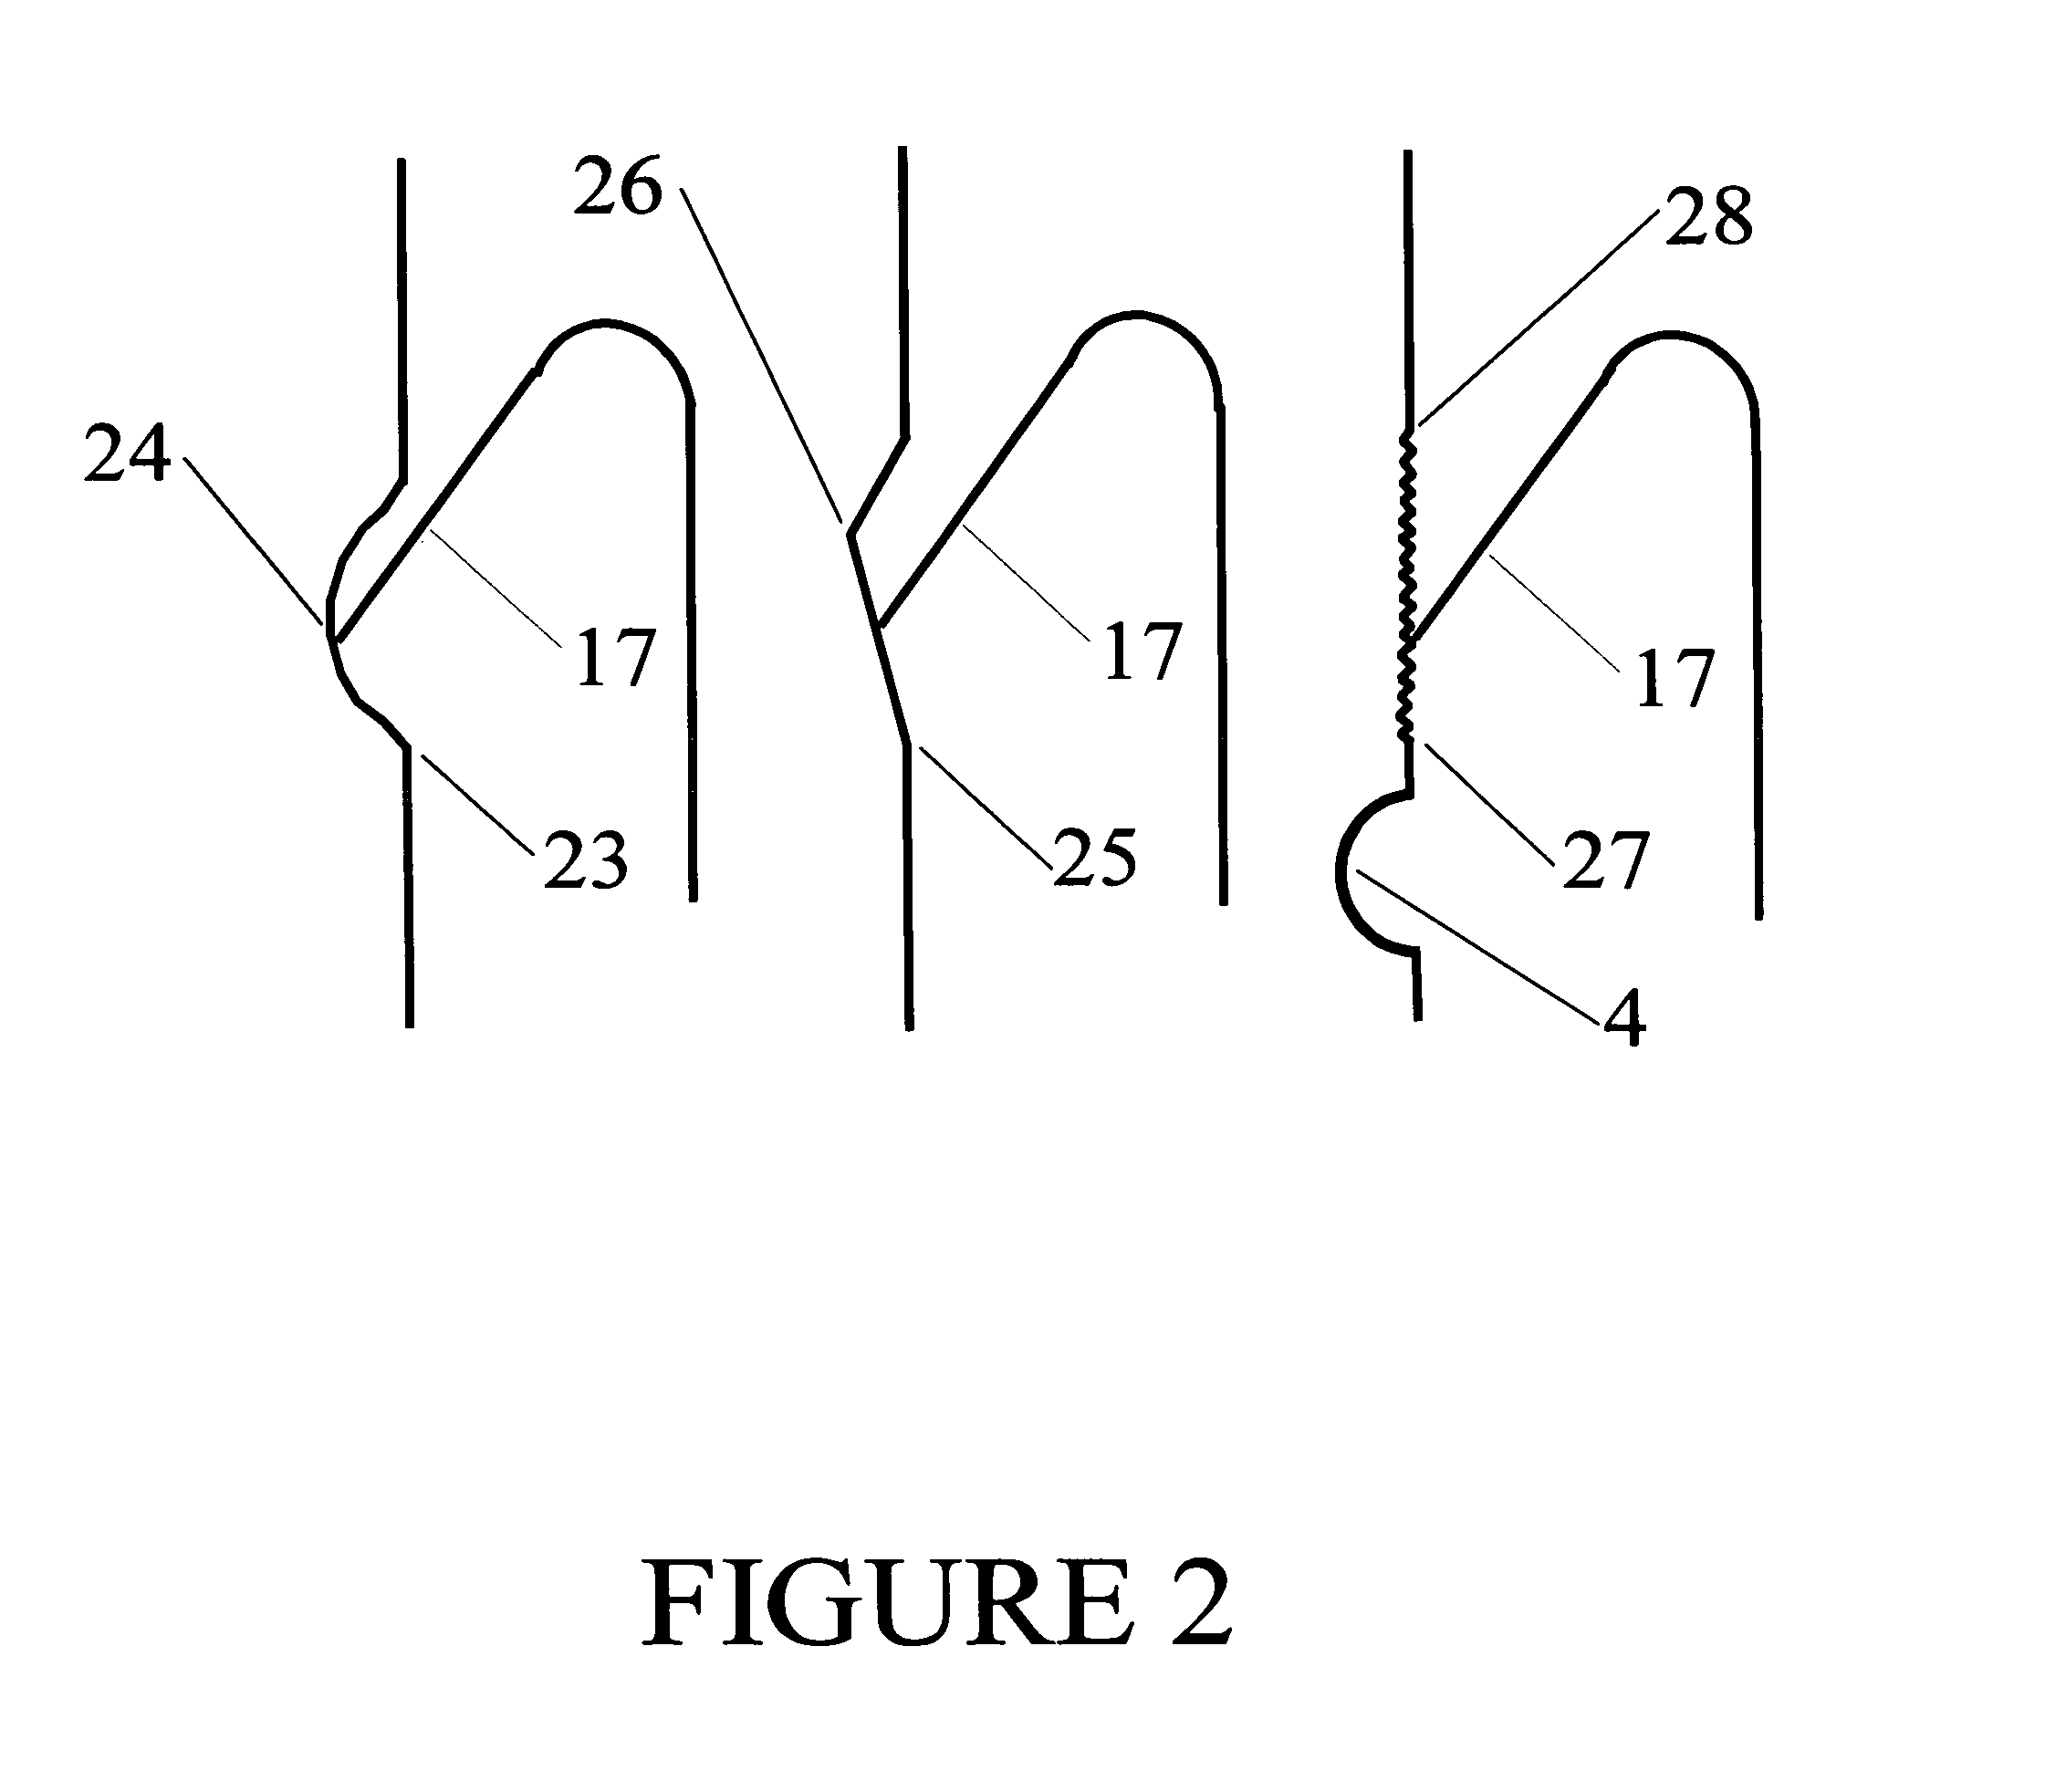 Method and apparatus for eliminating register boxes, improving penetration sealing, improving airflow and reducing the labor costs to install ceiling registers